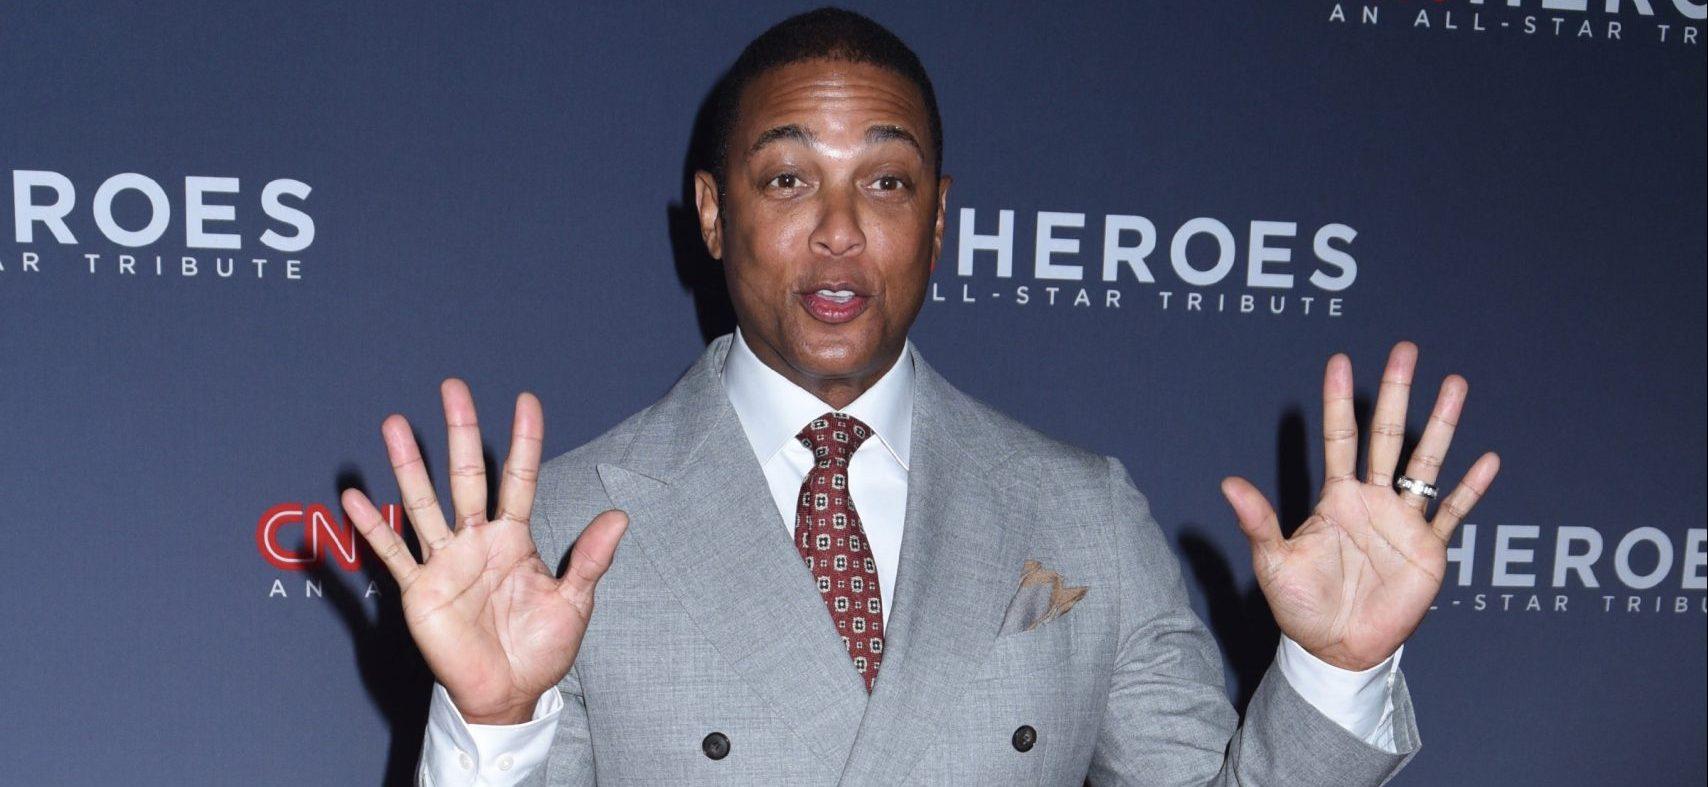 Don Lemon Paid Hefty Sum By CNN To Settle Anchor’s Network Ouster